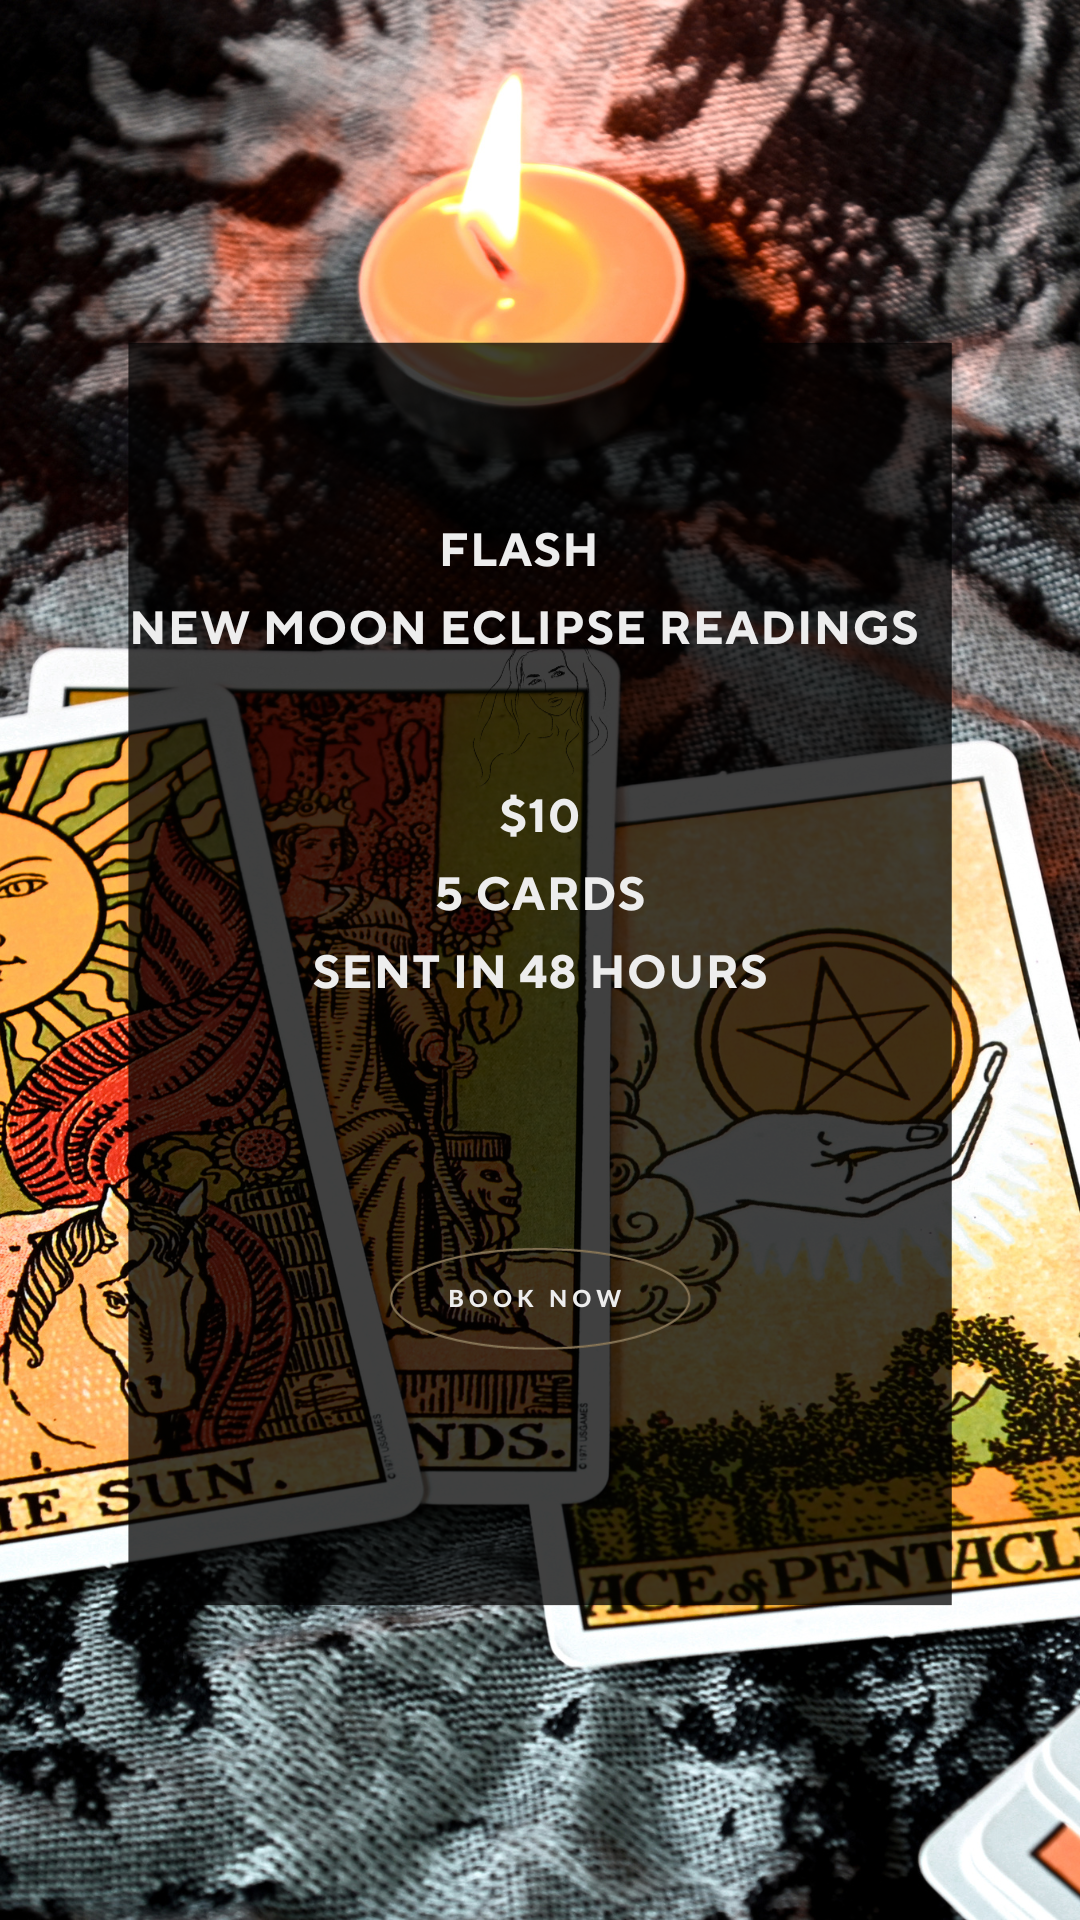 New Moon Eclipse Flash Readings